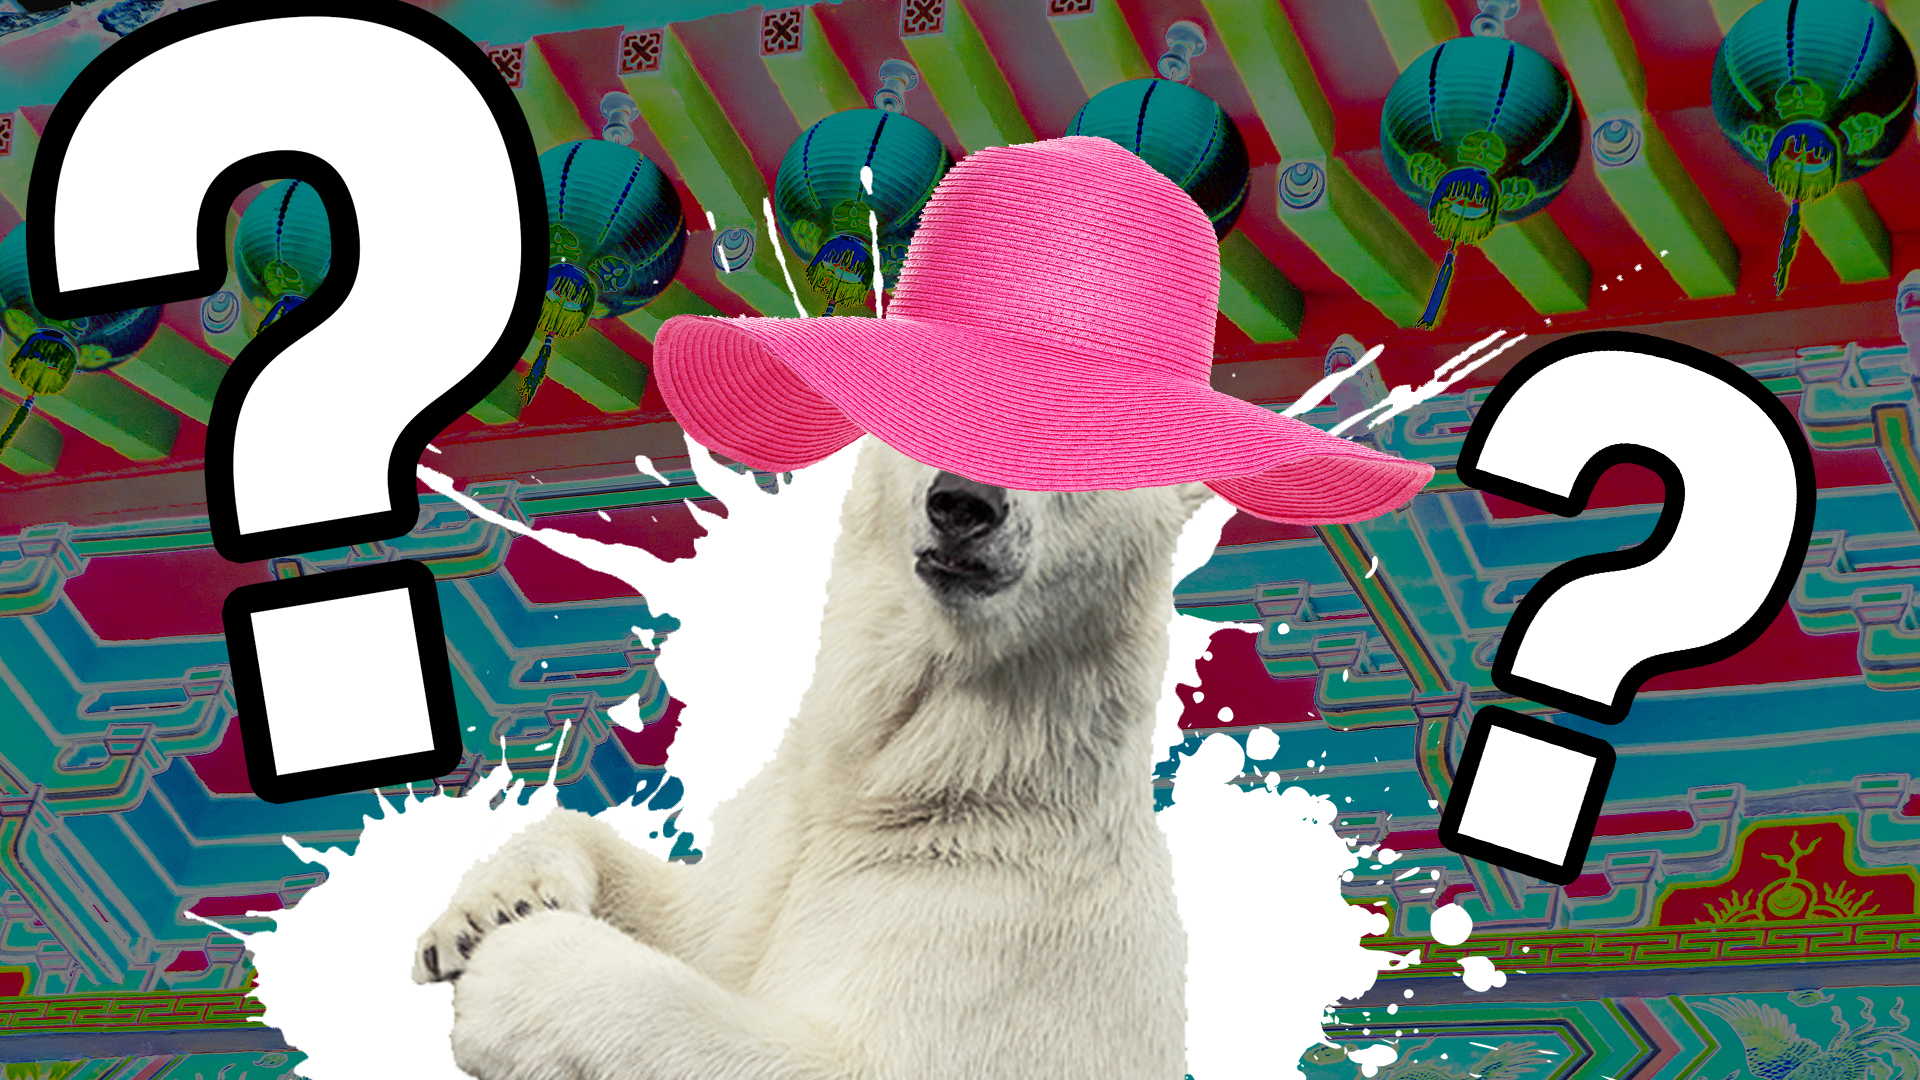 A polar bear in a fetching pink hat